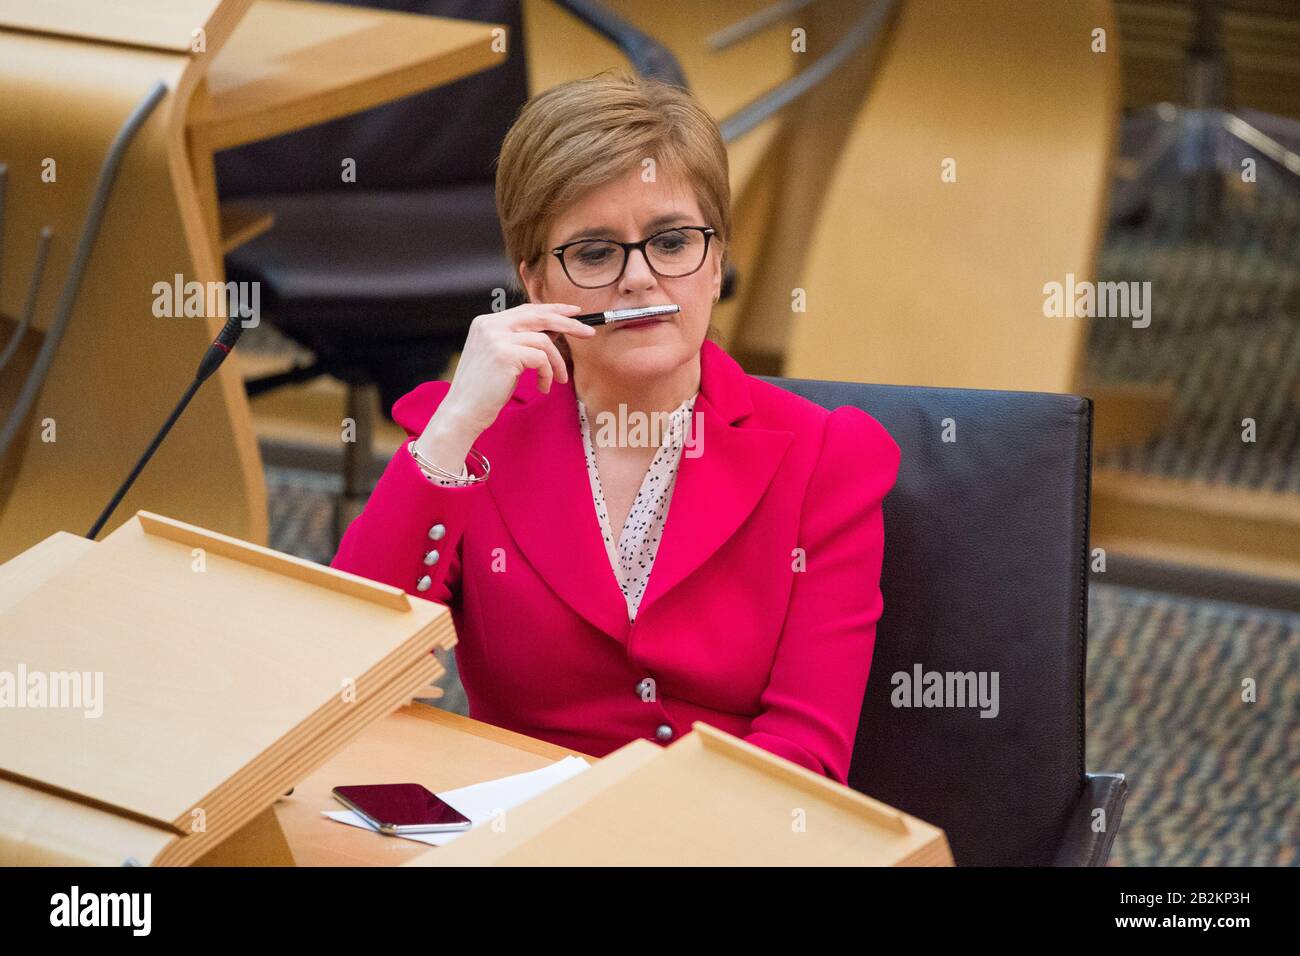 Edinburgh, UK. 3rd Mar, 2020. Pictured: Nicola Sturgeon MSP - First Minister of Scotland and Leader of the Scottish National Party (SNP). Ministerial Statement from Health Minister, Jeane Freeman MSP on the state of Coronovirus and Scotland's readiness to to mitigate the spread of the virus across Scotland. Scenes from the Scottish Parliament in Holyrood, Edinburgh. Credit: Colin Fisher/Alamy Live News Stock Photo